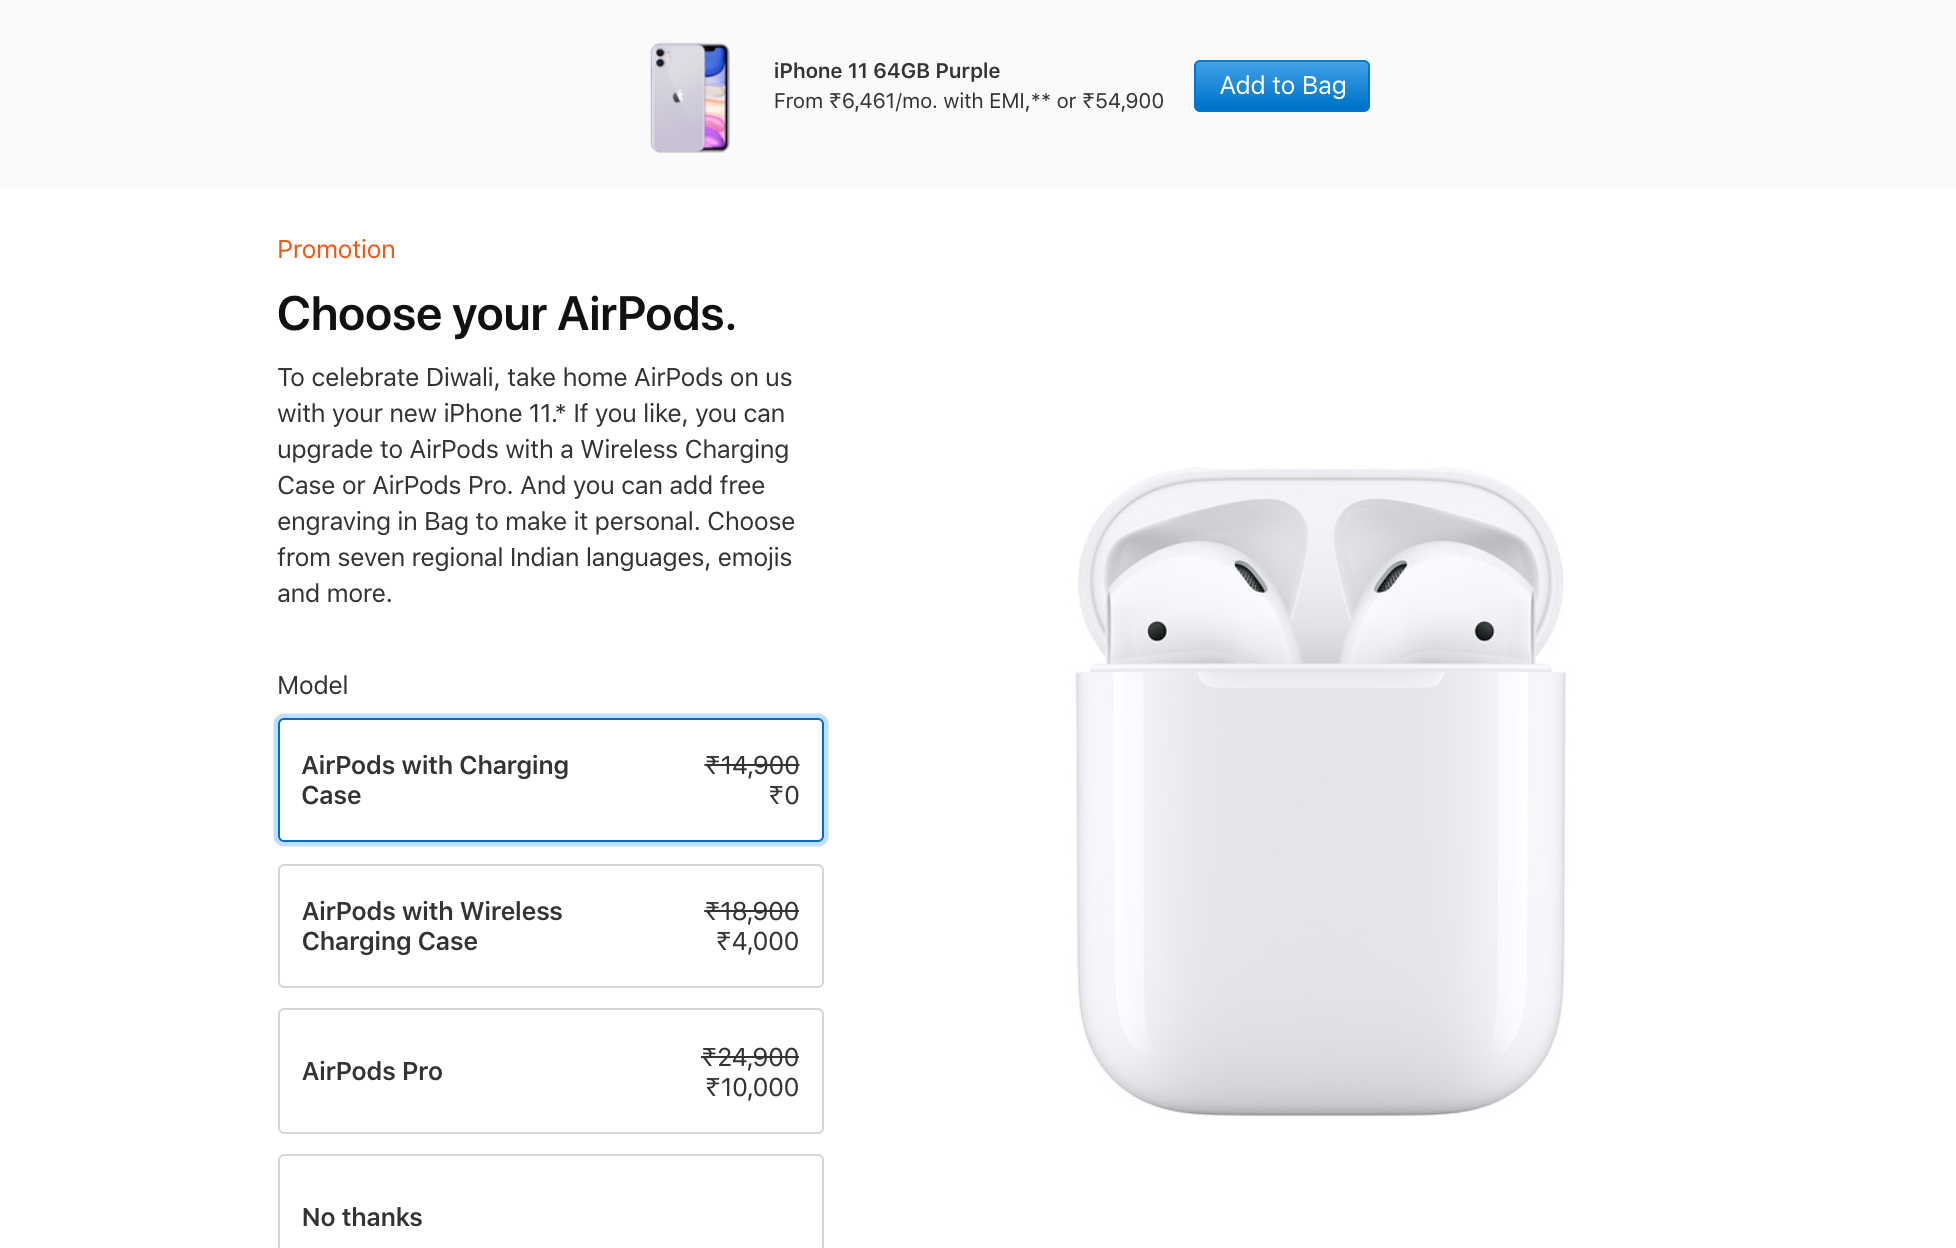 Сброс airpods 2. AIRPODS Pro 2 кейс. AIRPODS Pro 2 оригинал кейс. Серийный номер на кейсе AIRPODS. AIRPODS Pro 2 серийный номер на кейсе.